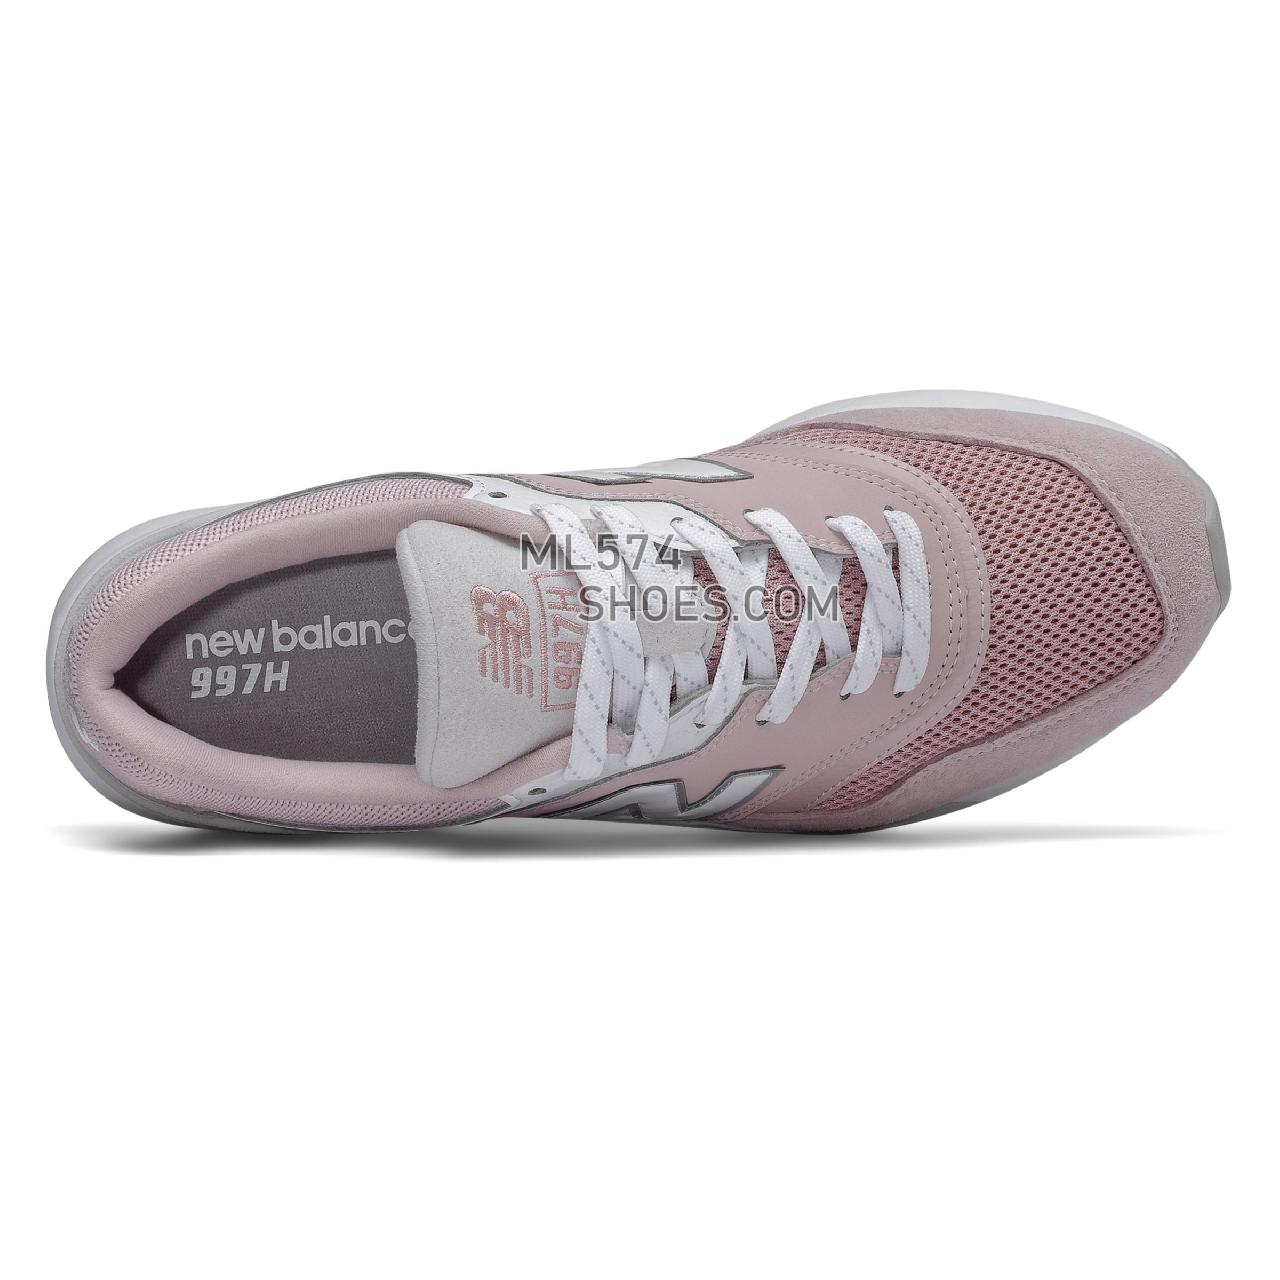 New Balance 997H - Women's Sport Style Sneakers - Space Pink with Summer Fog - CW997HBP